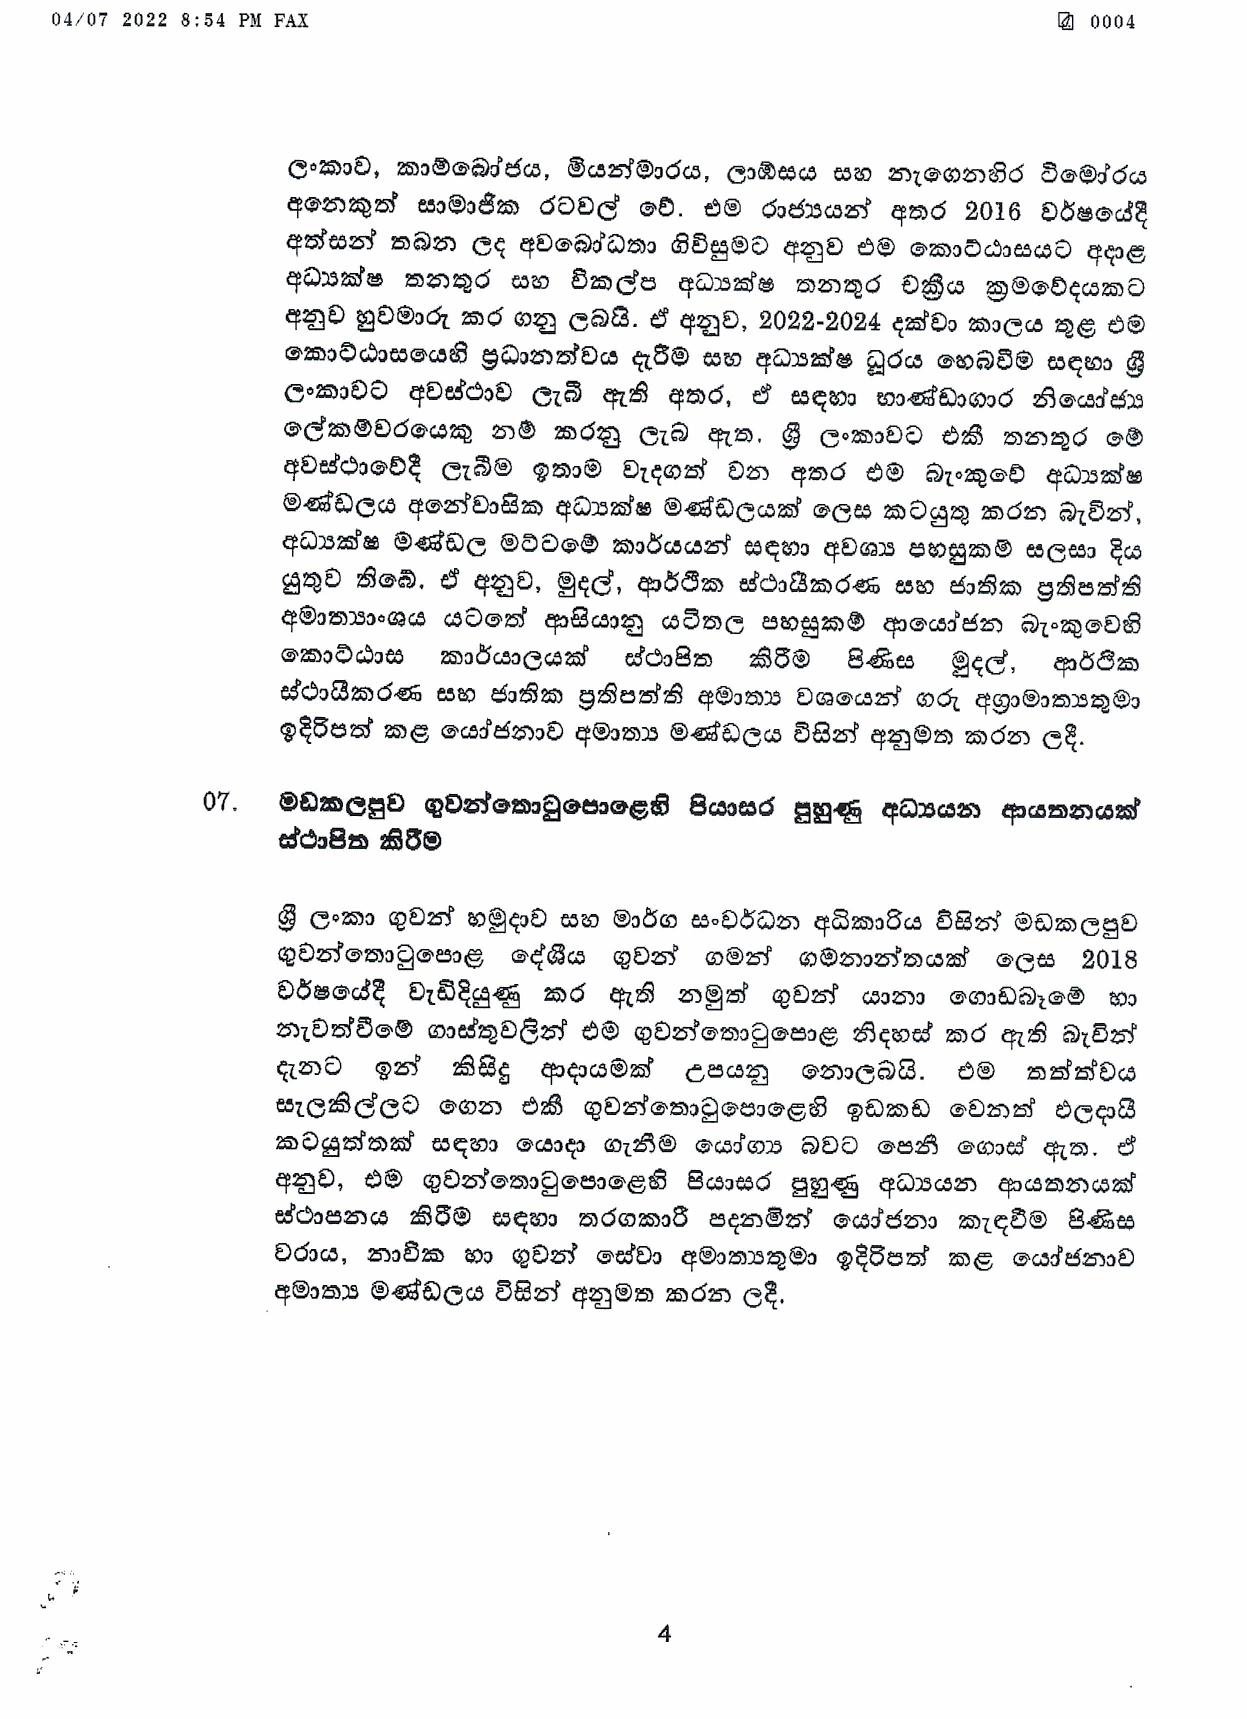 Cabinet Decision on 04.07.2022 page 004